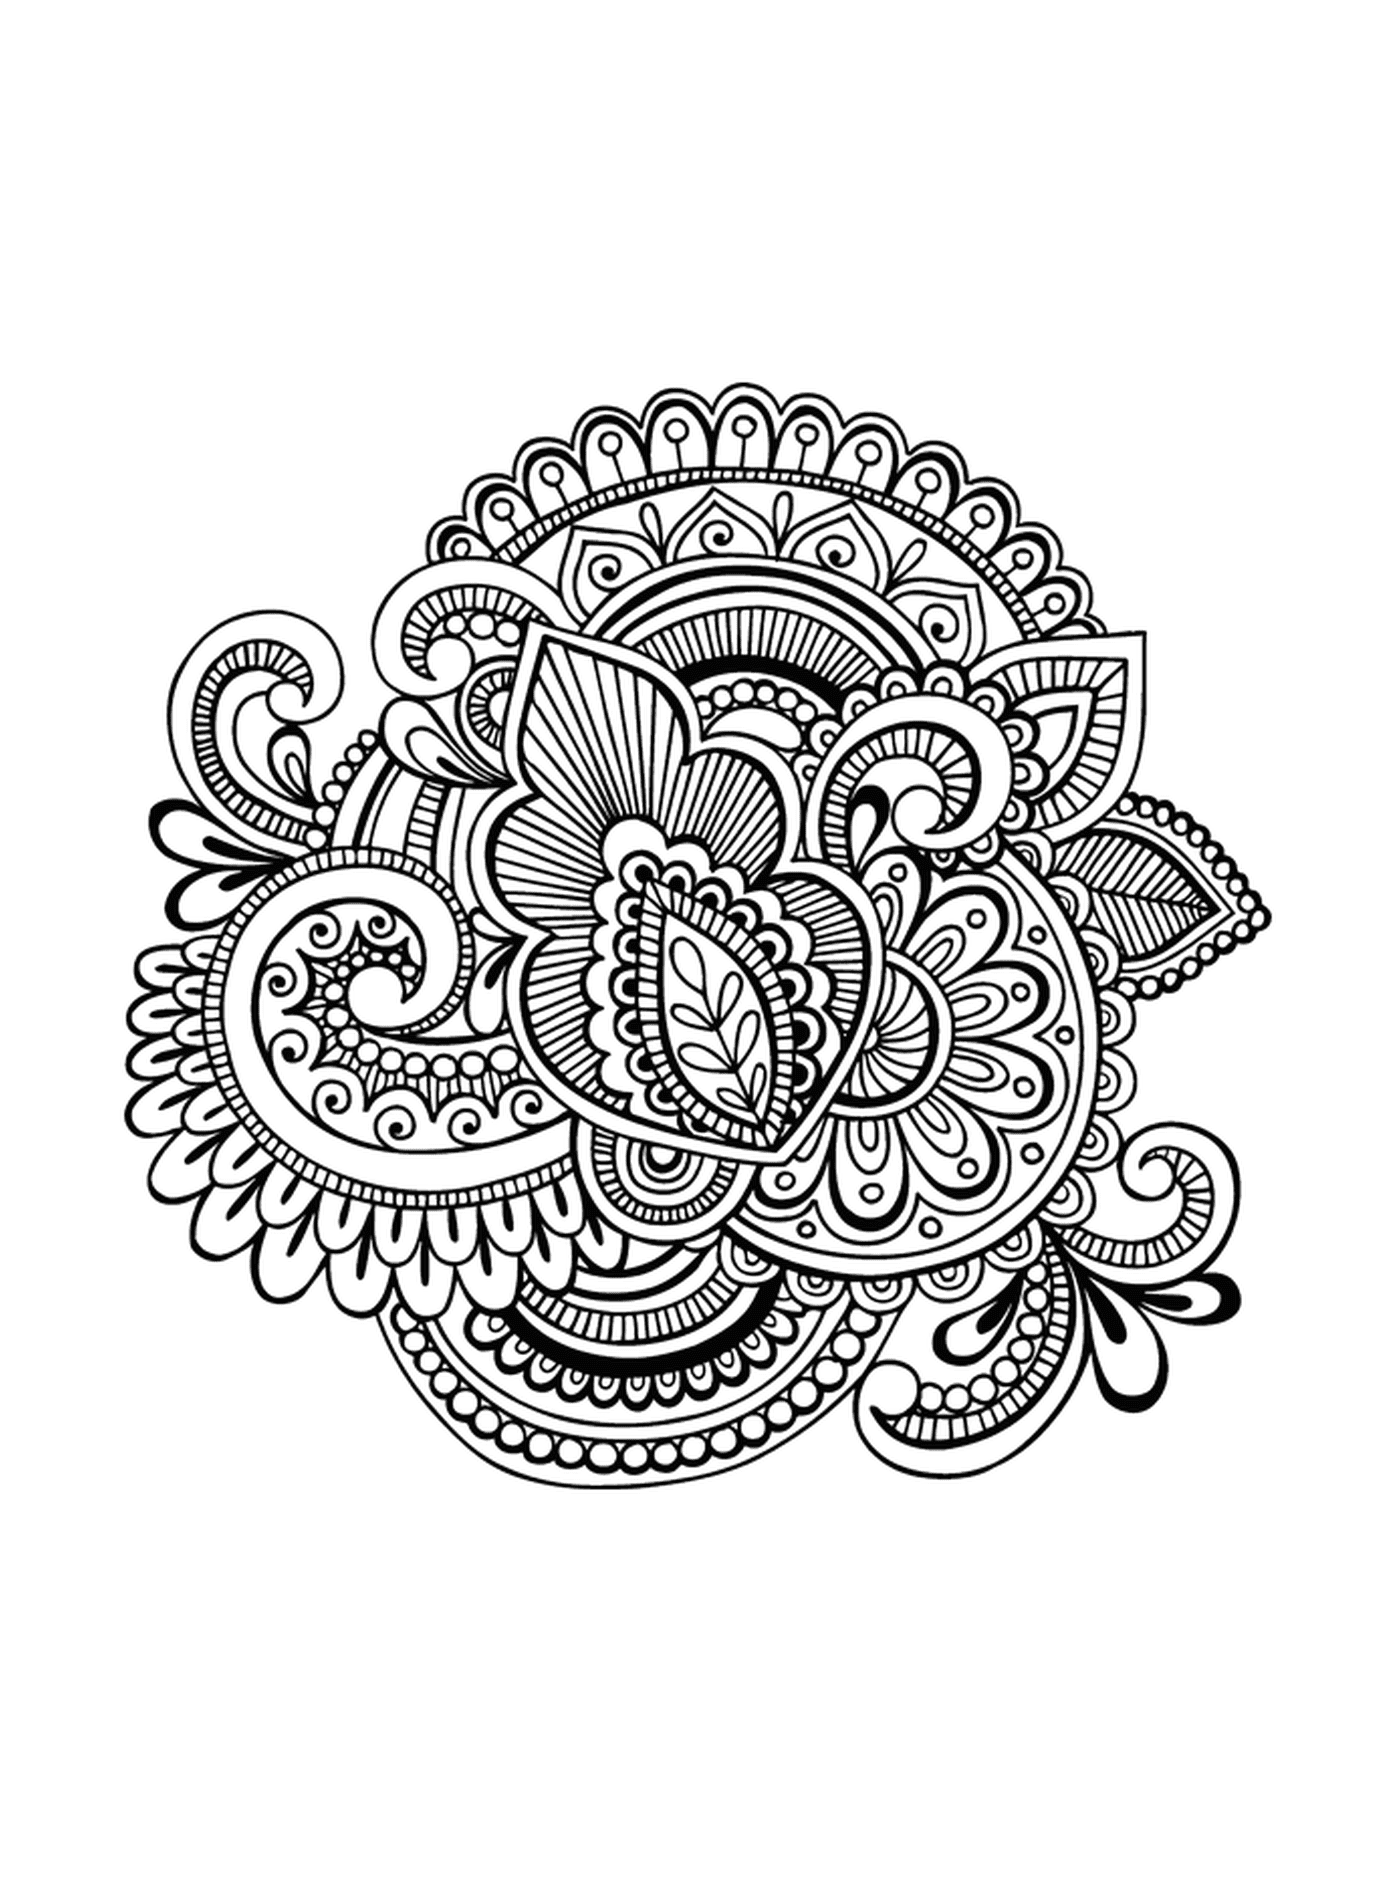  A complex floral pattern in black and white 